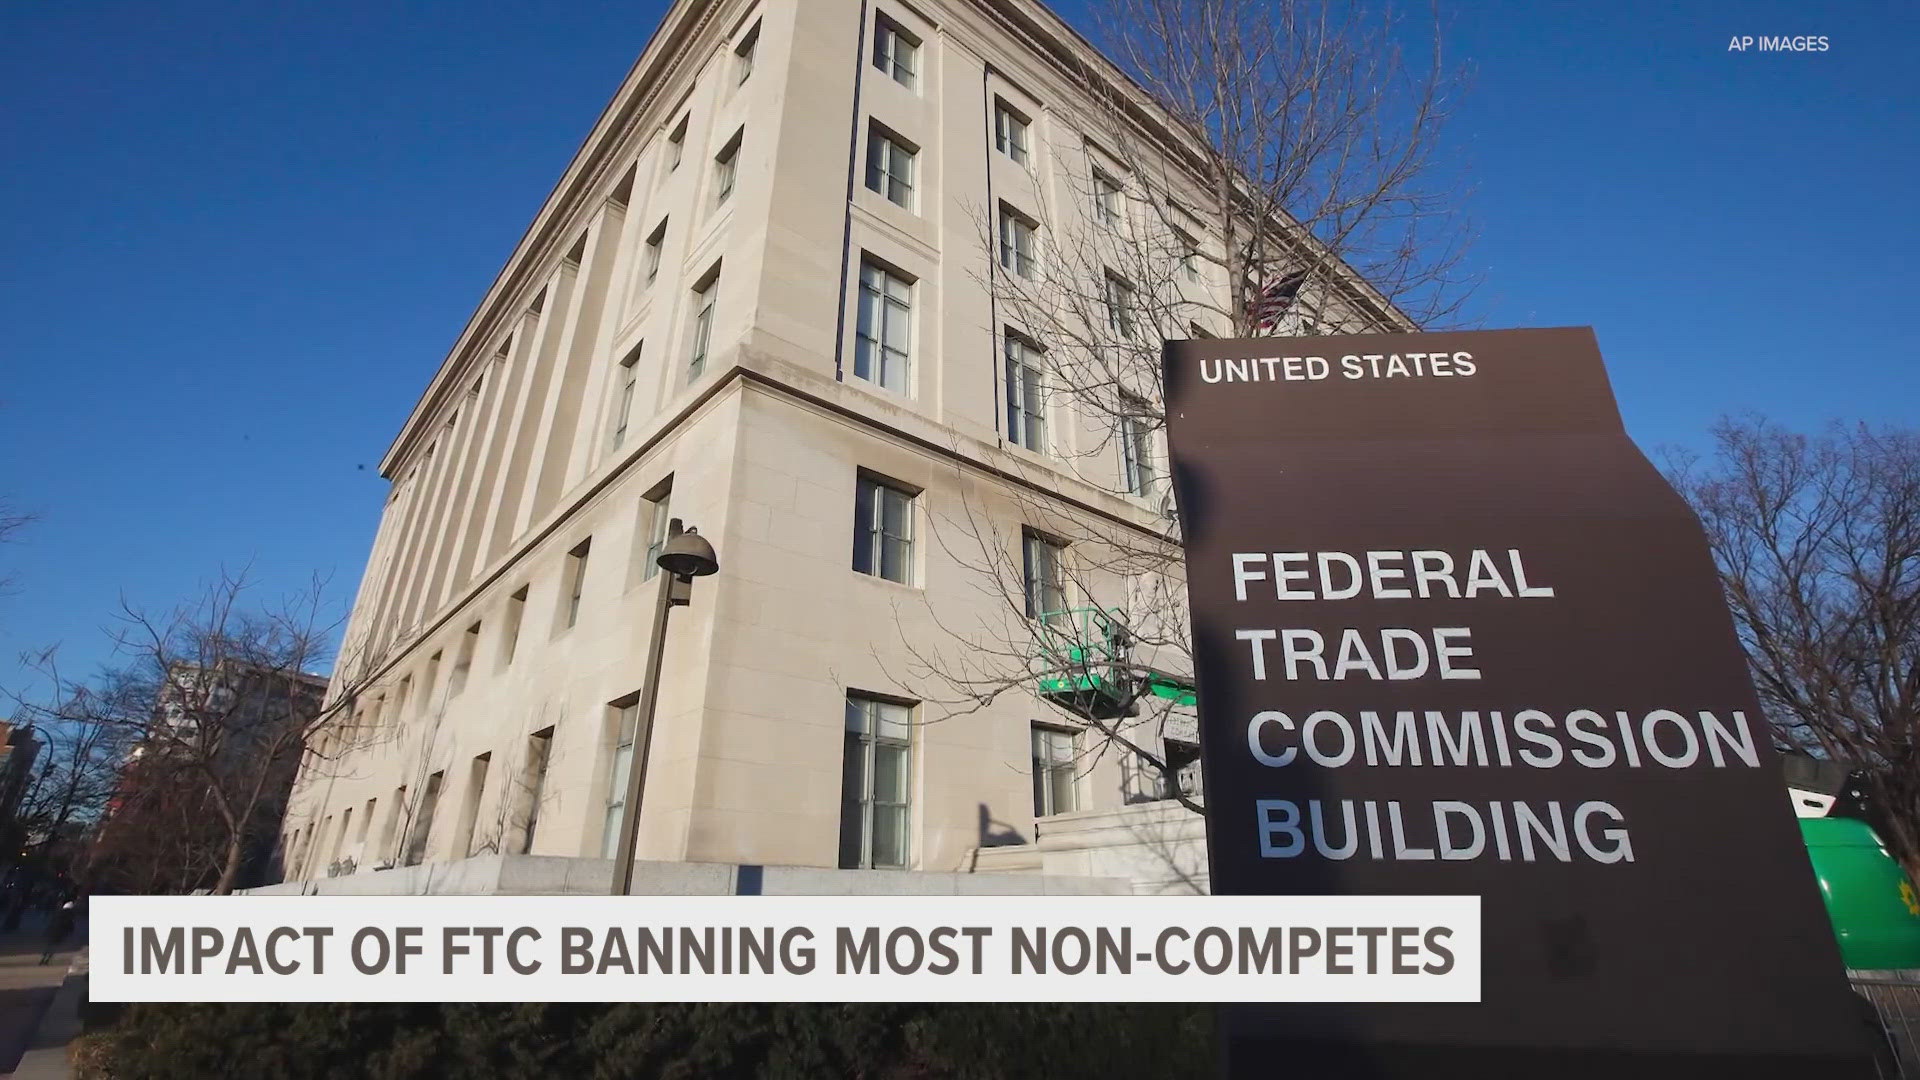 The FTC has voted to ban non-competes, what would that mean?